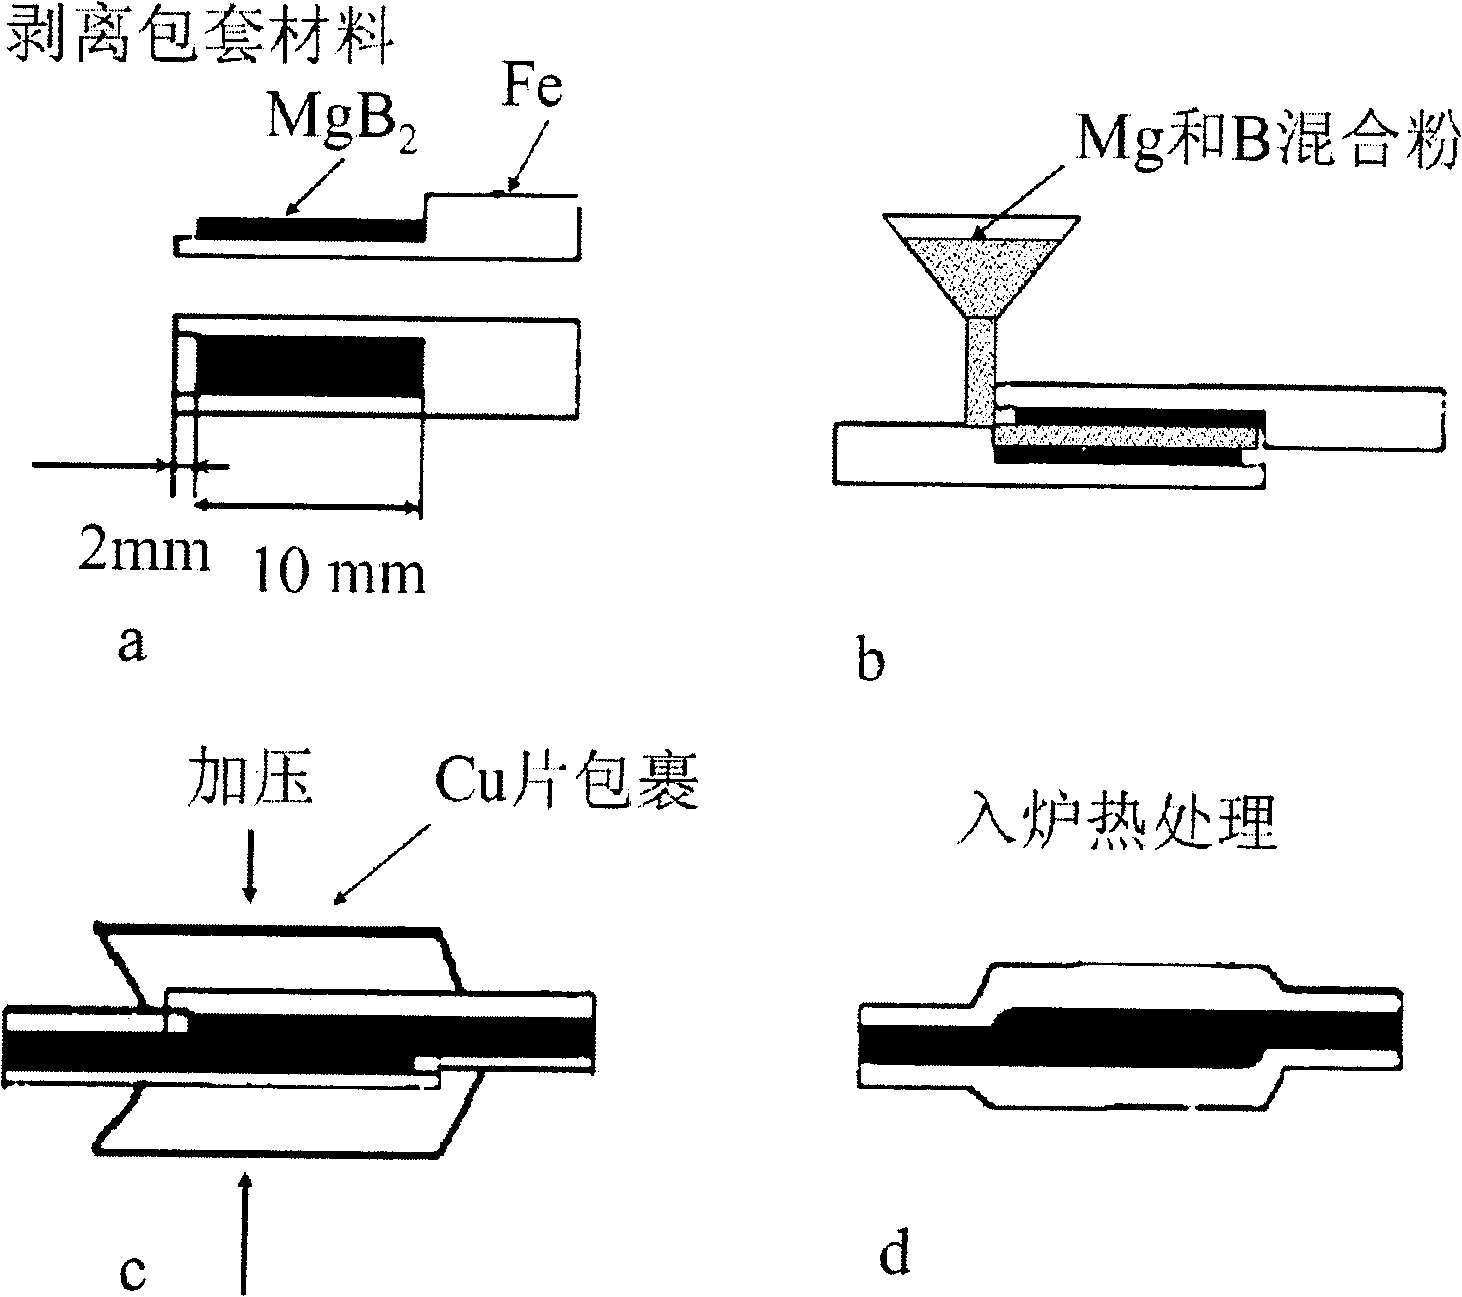 Connecting method of MgB* superconduction in strip shape